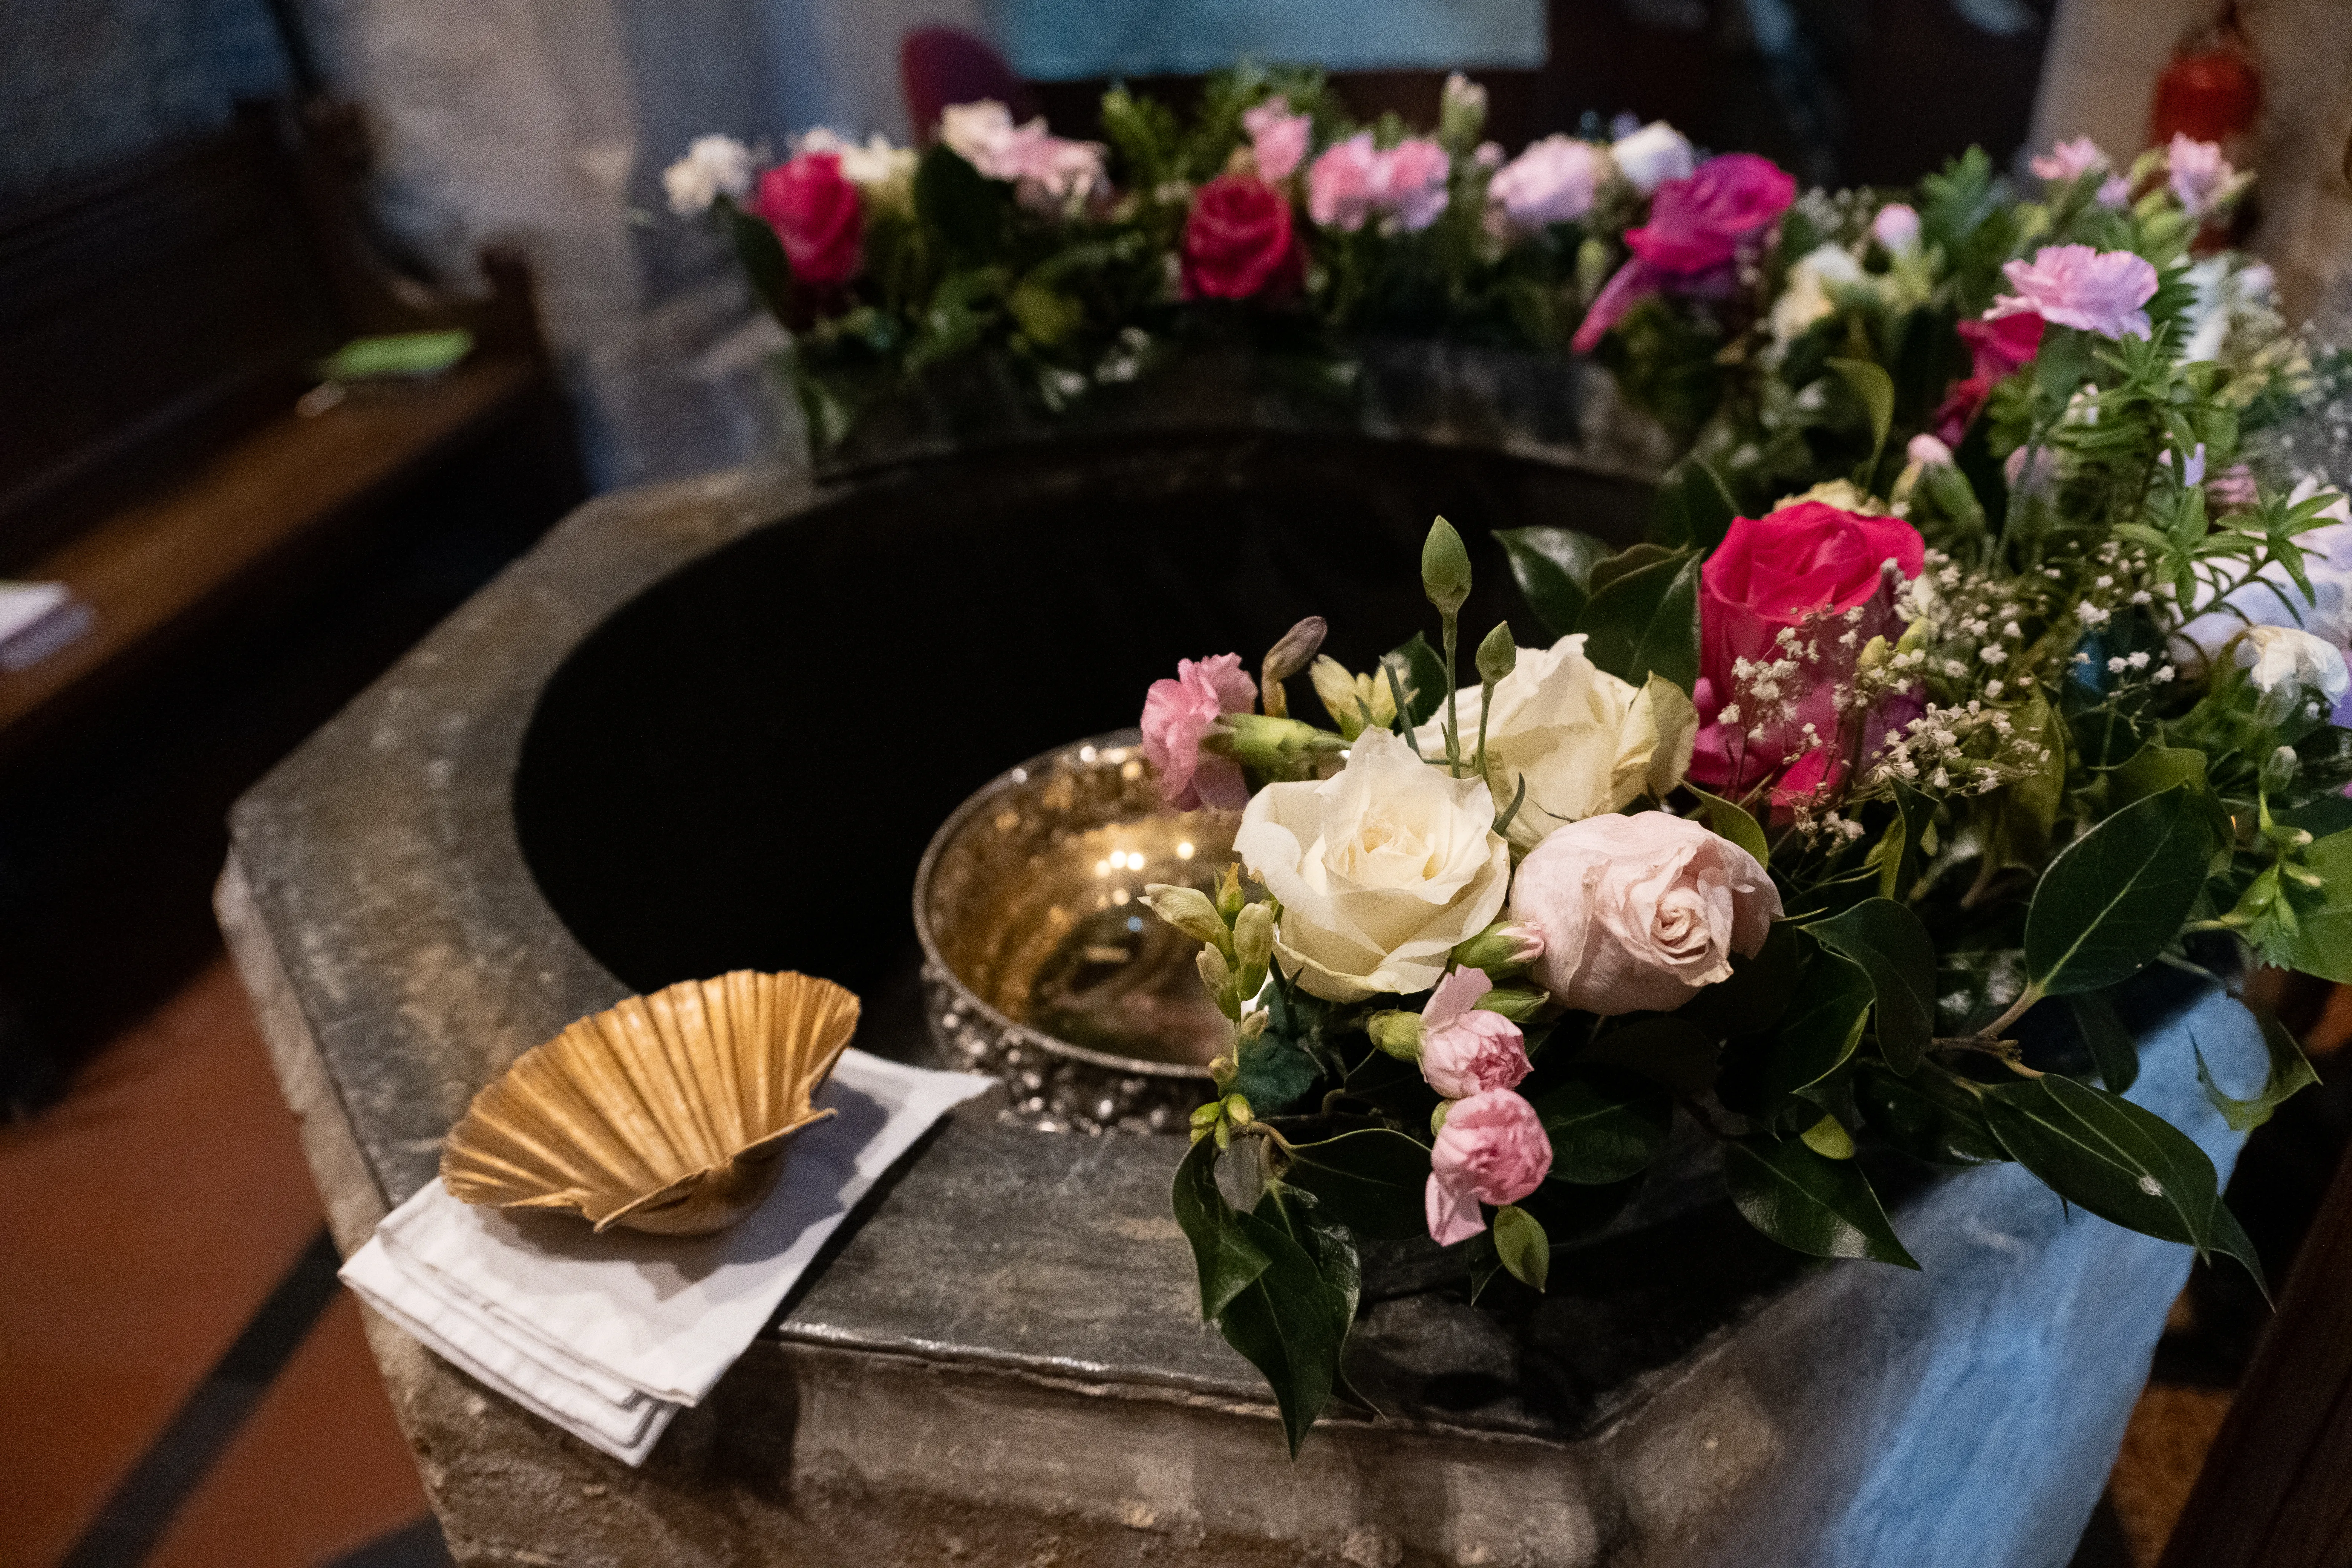 The St Laurence font decorated in pink and white roses, with a small gold seashell on the side, ready for a baptism